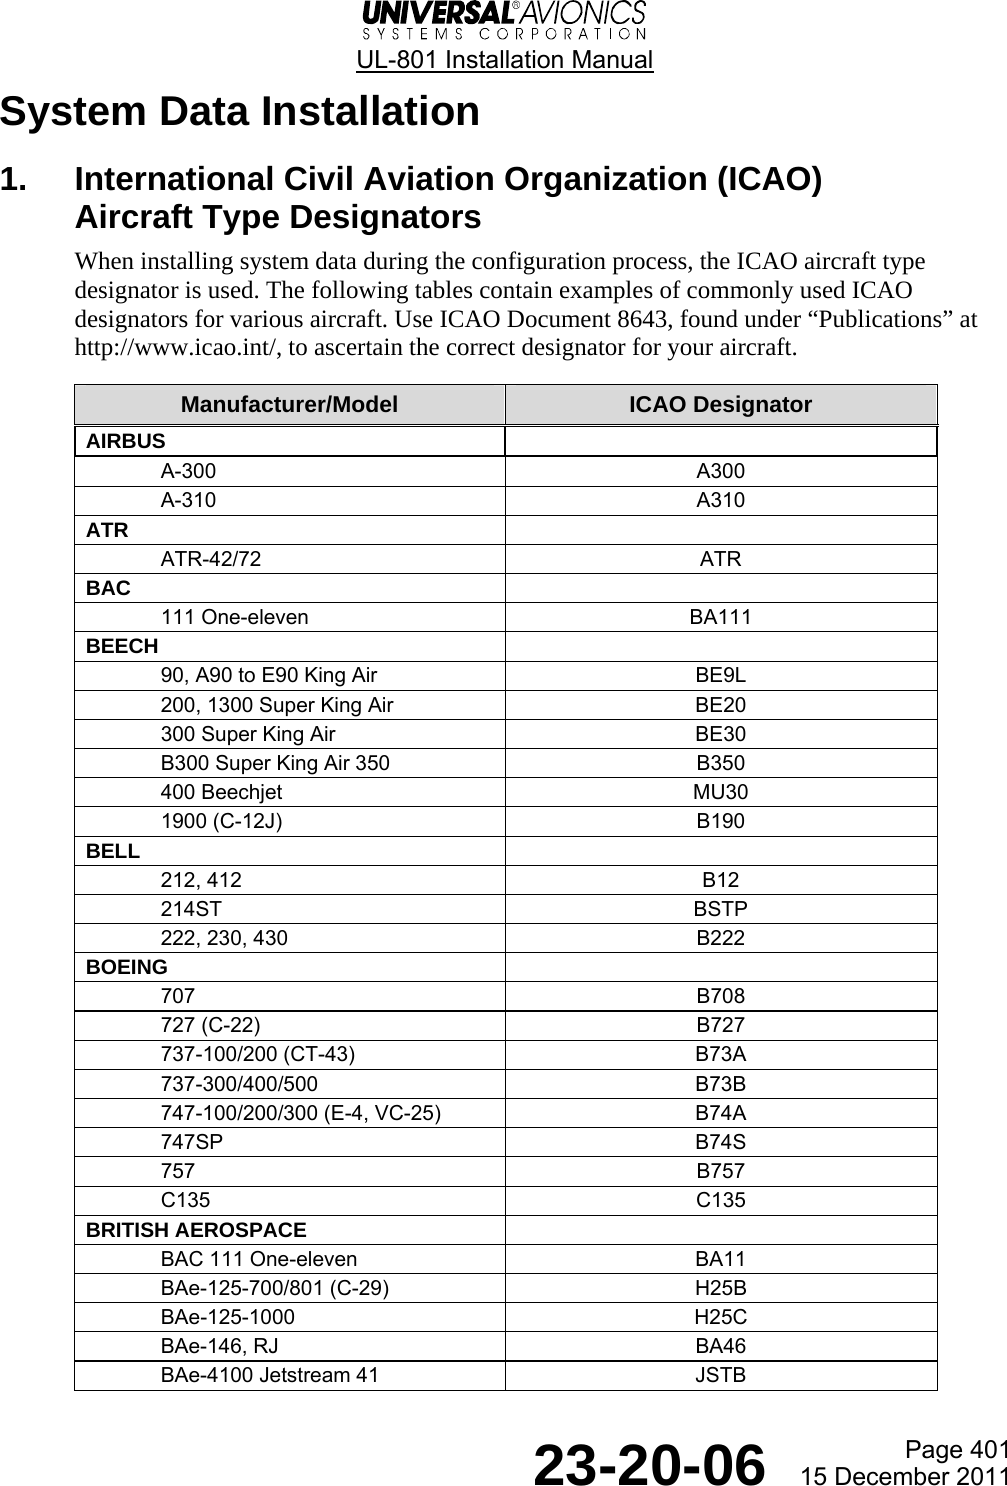  UL-801 Installation Manual  Page 401  23-20-06  15 December 2011 System Data Installation 1.  International Civil Aviation Organization (ICAO) Aircraft Type Designators When installing system data during the configuration process, the ICAO aircraft type designator is used. The following tables contain examples of commonly used ICAO designators for various aircraft. Use ICAO Document 8643, found under “Publications” at http://www.icao.int/, to ascertain the correct designator for your aircraft.  Manufacturer/Model  ICAO Designator AIRBUS    A-300  A300  A-310  A310 ATR    ATR-42/72  ATR BAC    111 One-eleven  BA111 BEECH     90, A90 to E90 King Air  BE9L   200, 1300 Super King Air  BE20   300 Super King Air  BE30   B300 Super King Air 350  B350  400 Beechjet  MU30  1900 (C-12J)  B190 BELL    212, 412  B12  214ST  BSTP   222, 230, 430  B222 BOEING    707  B708  727 (C-22)  B727  737-100/200 (CT-43)  B73A  737-300/400/500  B73B   747-100/200/300 (E-4, VC-25)  B74A  747SP  B74S  757  B757  C135  C135 BRITISH AEROSPACE     BAC 111 One-eleven  BA11  BAe-125-700/801 (C-29)  H25B  BAe-125-1000  H25C  BAe-146, RJ  BA46   BAe-4100 Jetstream 41  JSTB   